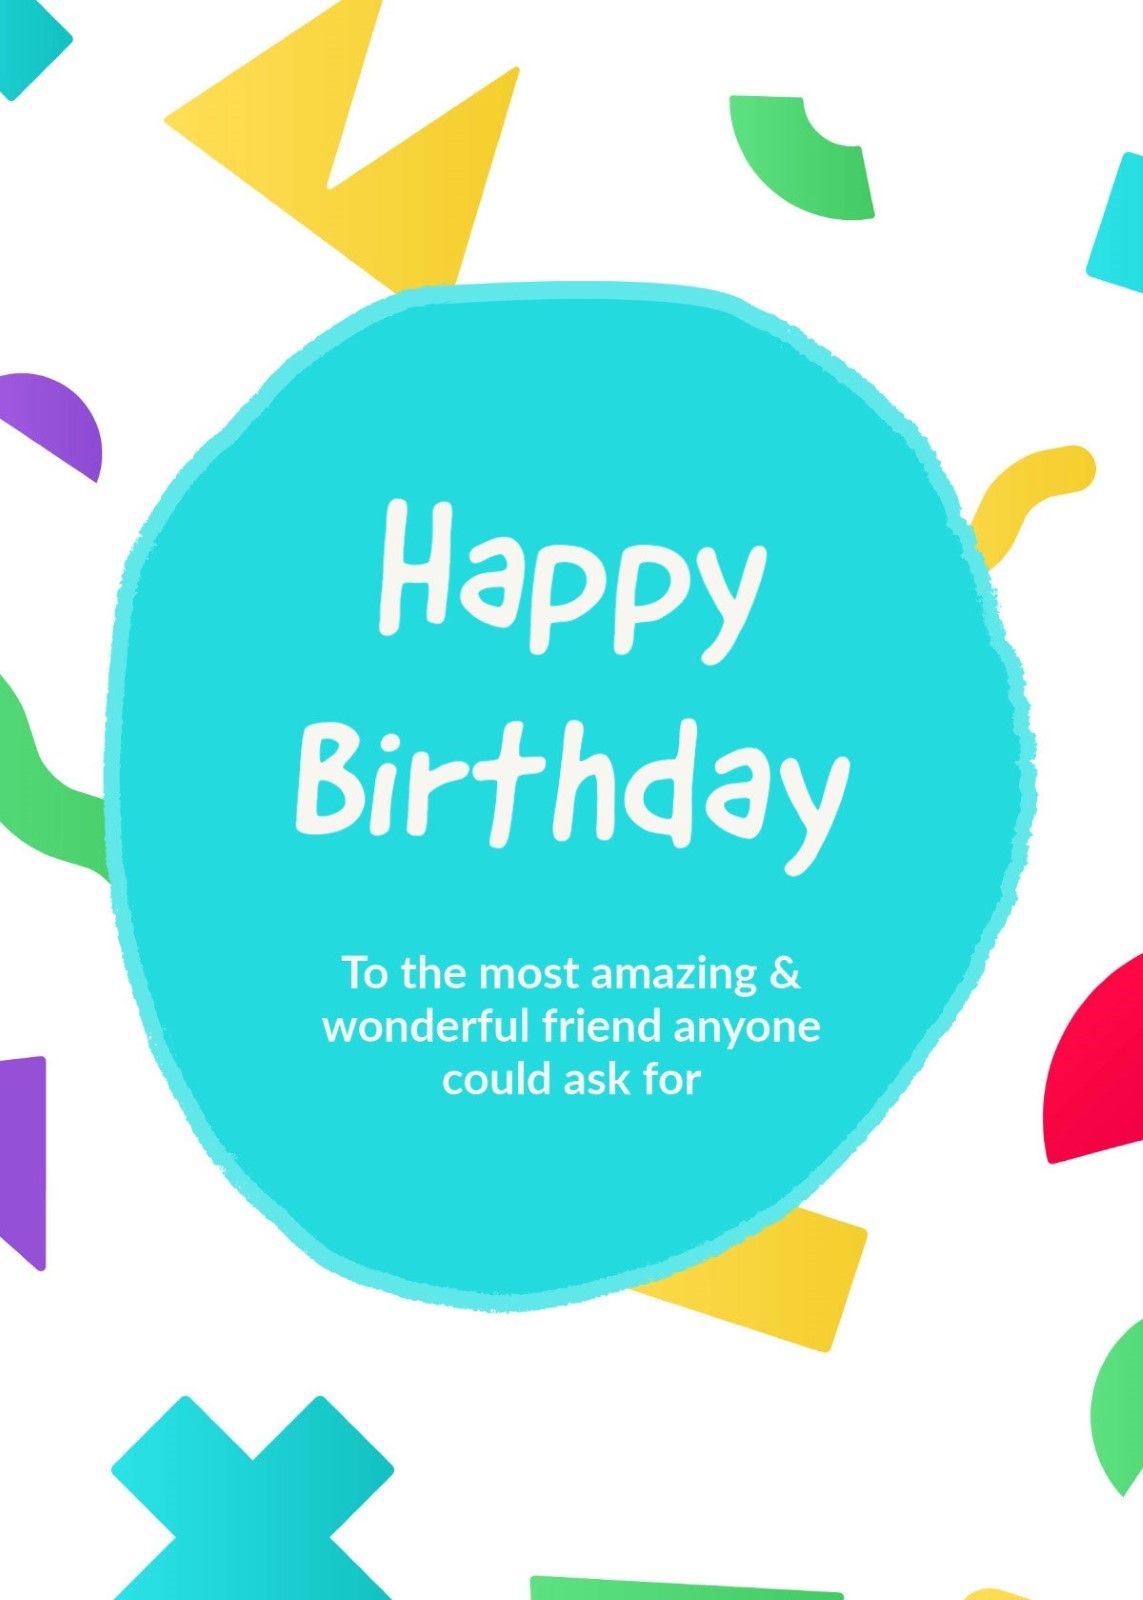 Free Birthday Card Maker with Online Templates